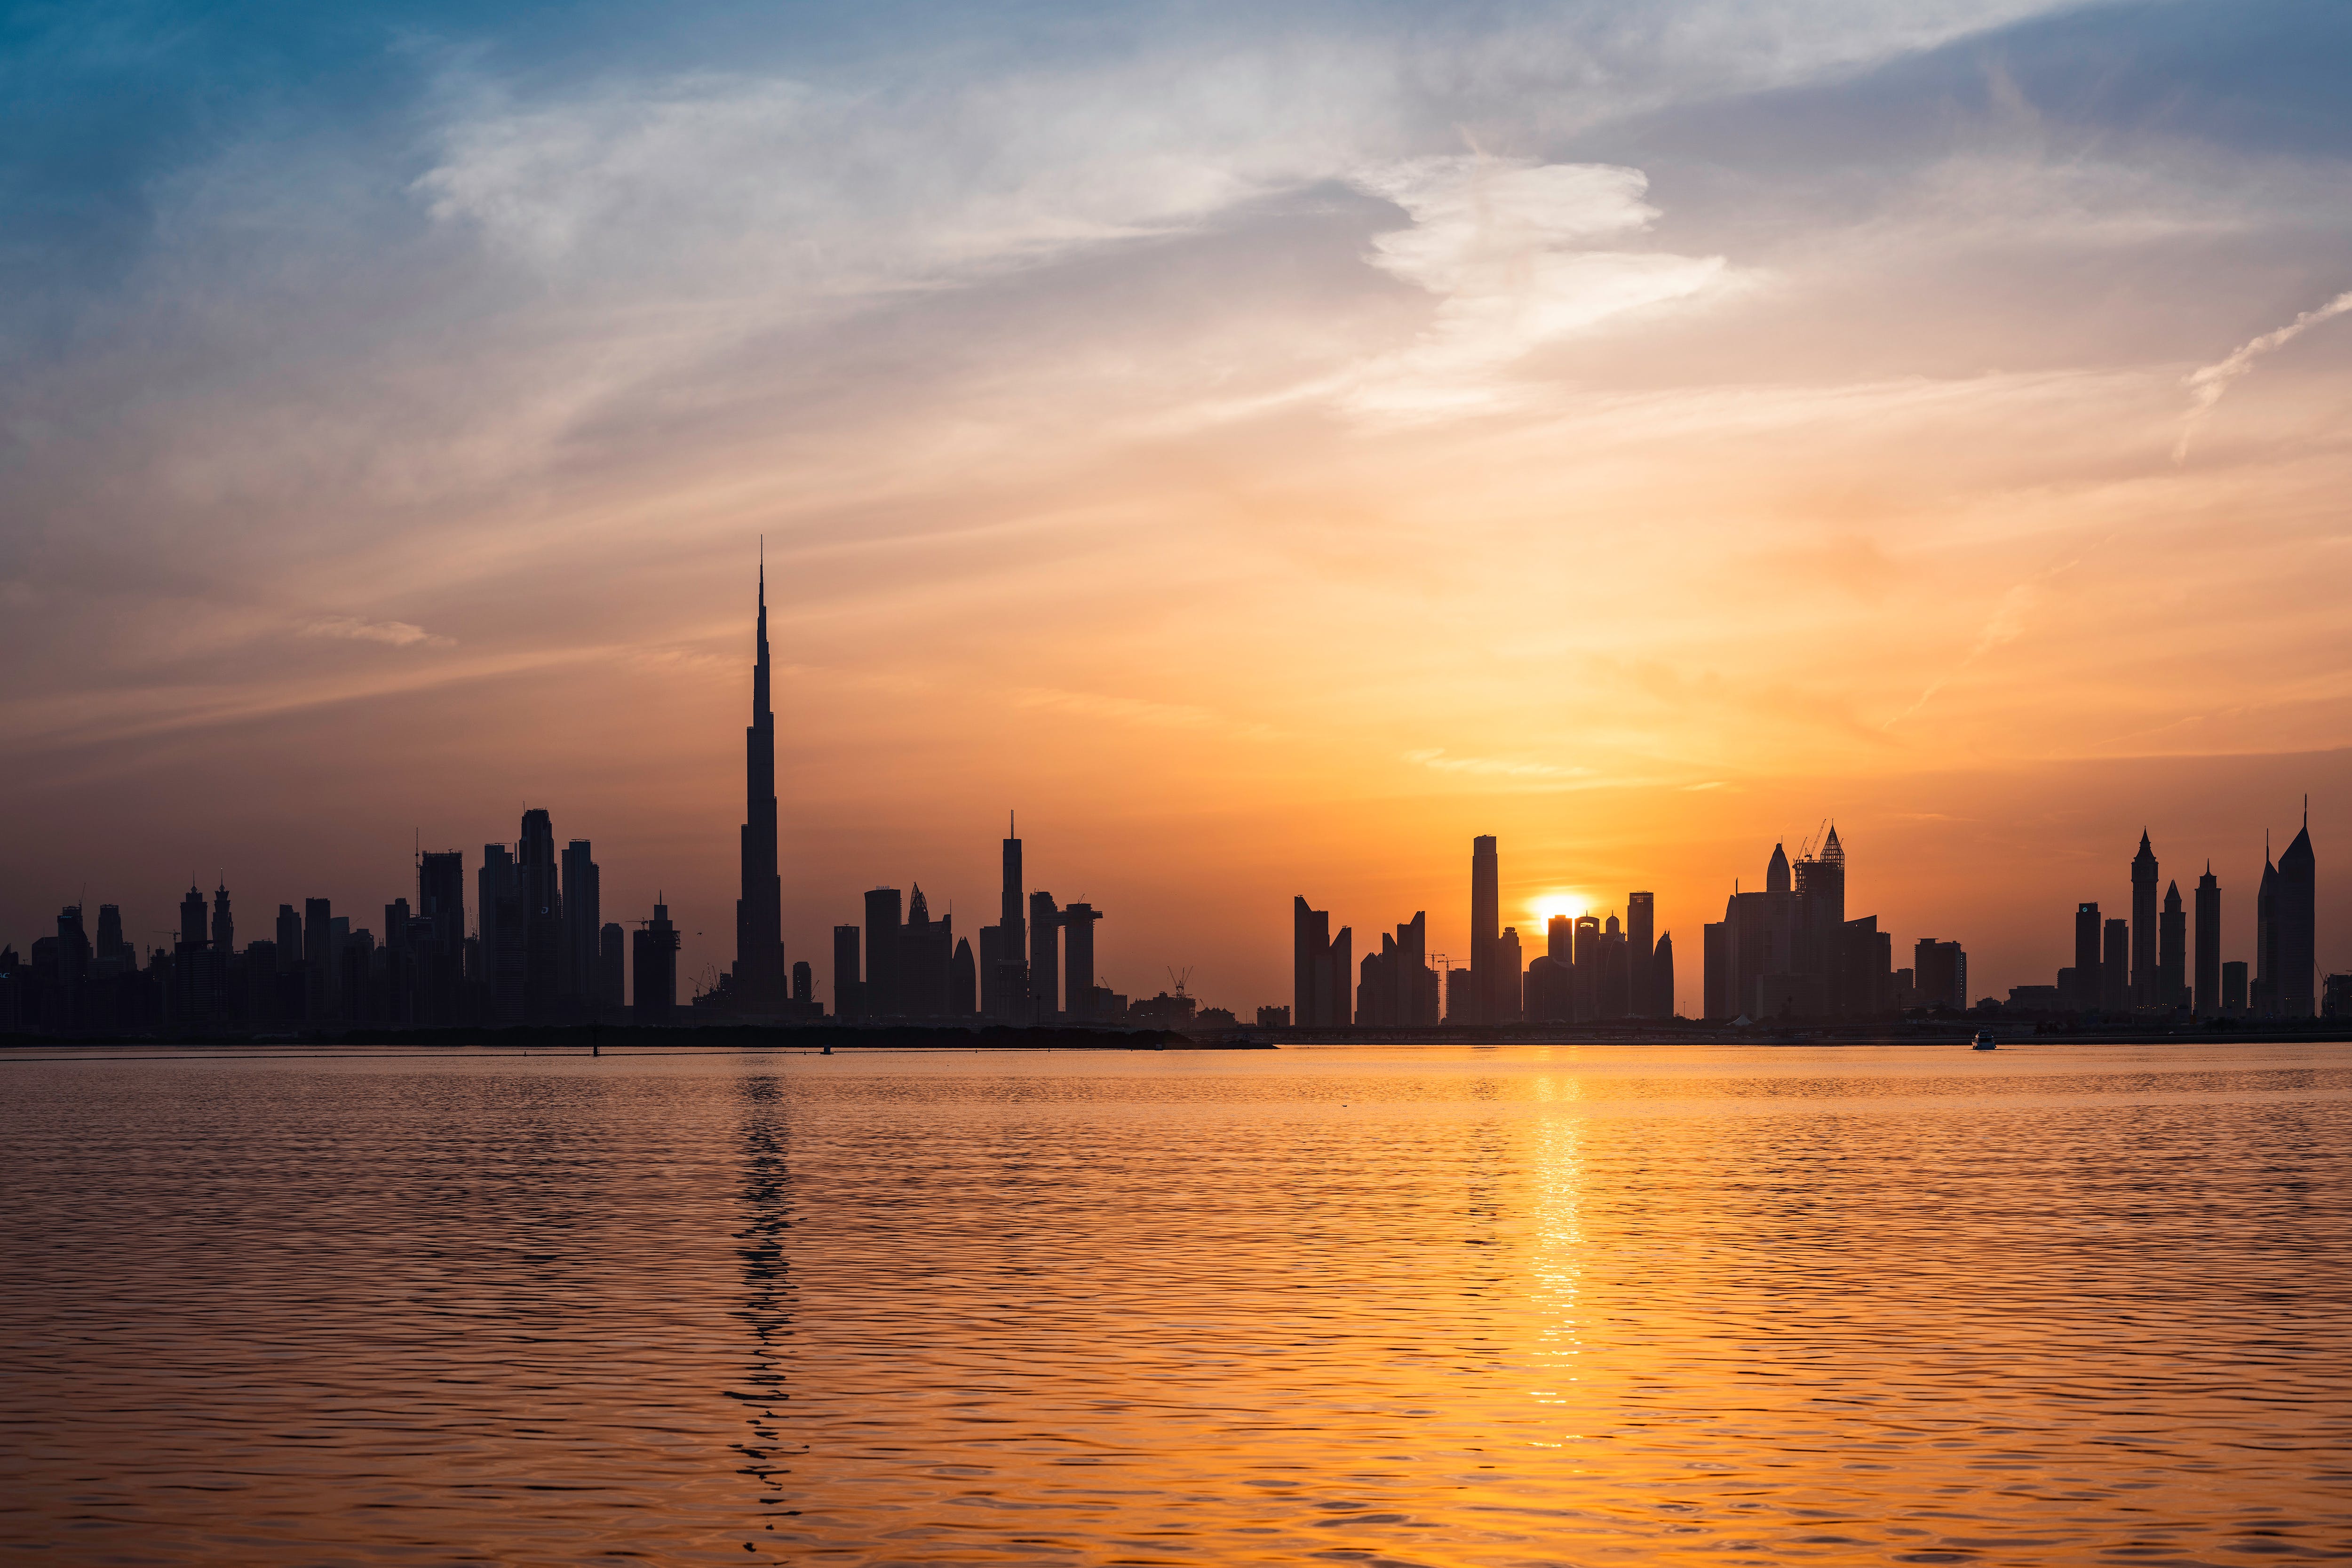 "Dazzling Dubai: A Journey into the Heart of Extravagance"